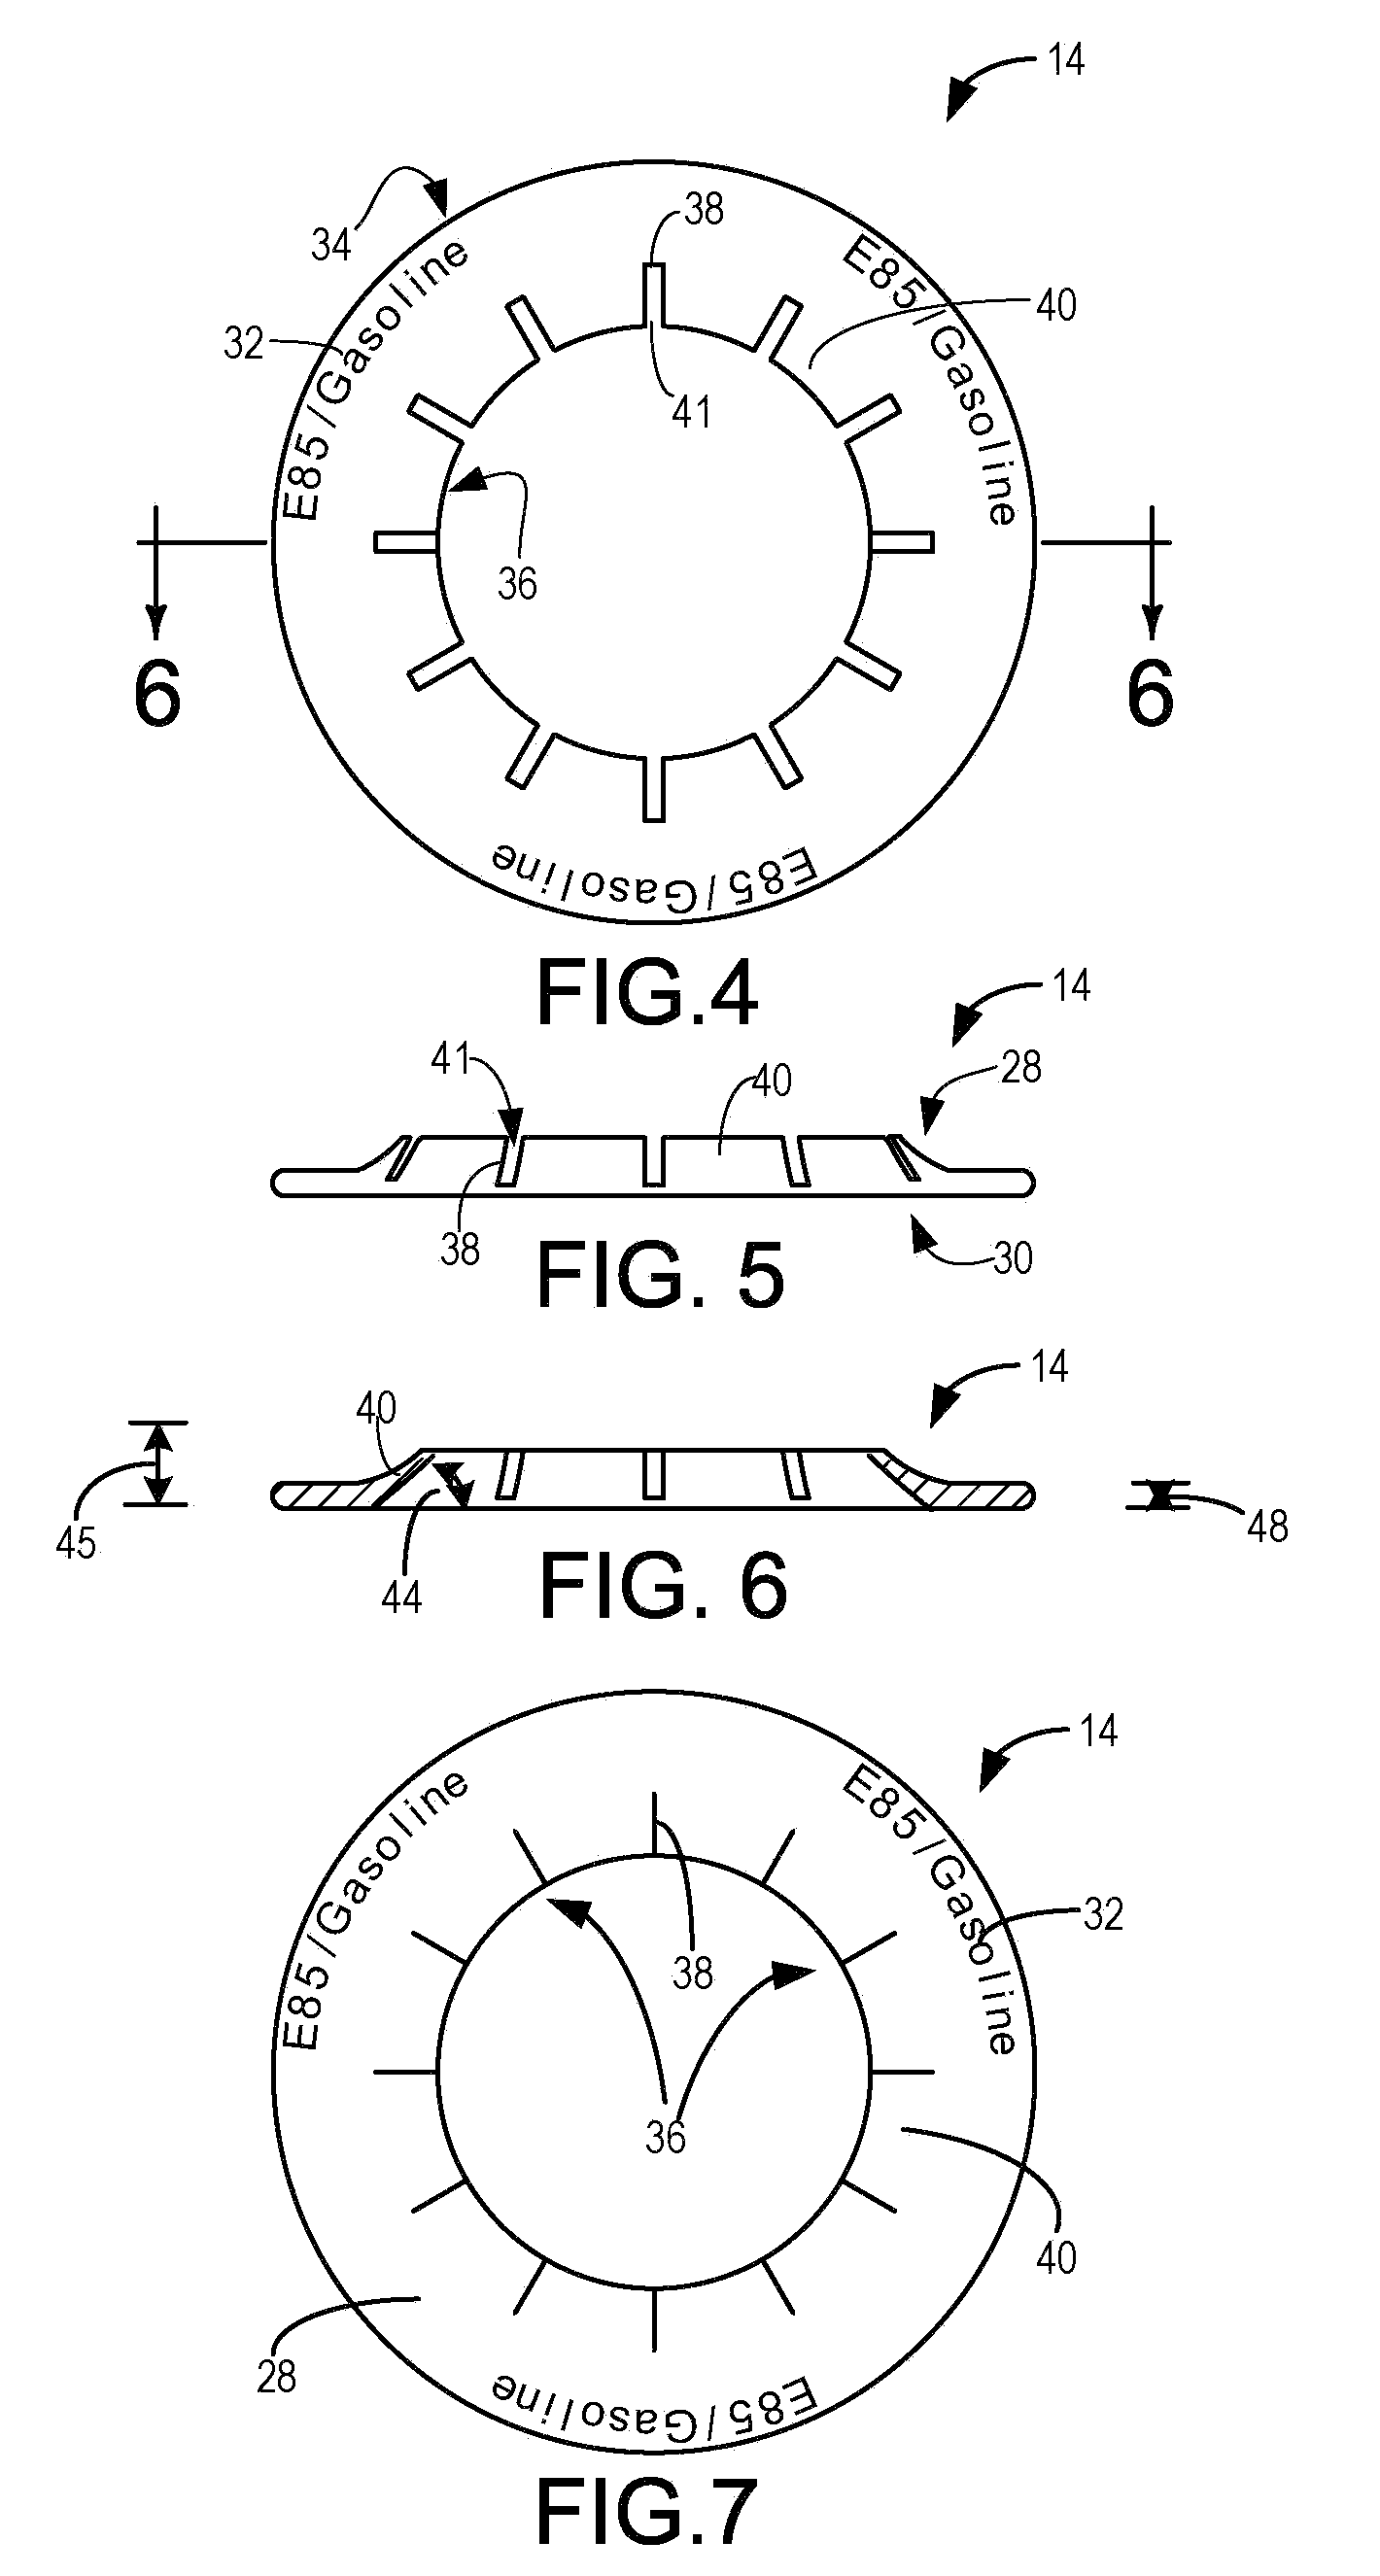 Fuel Filler Pipe Information Collar for Fuel Type Identification